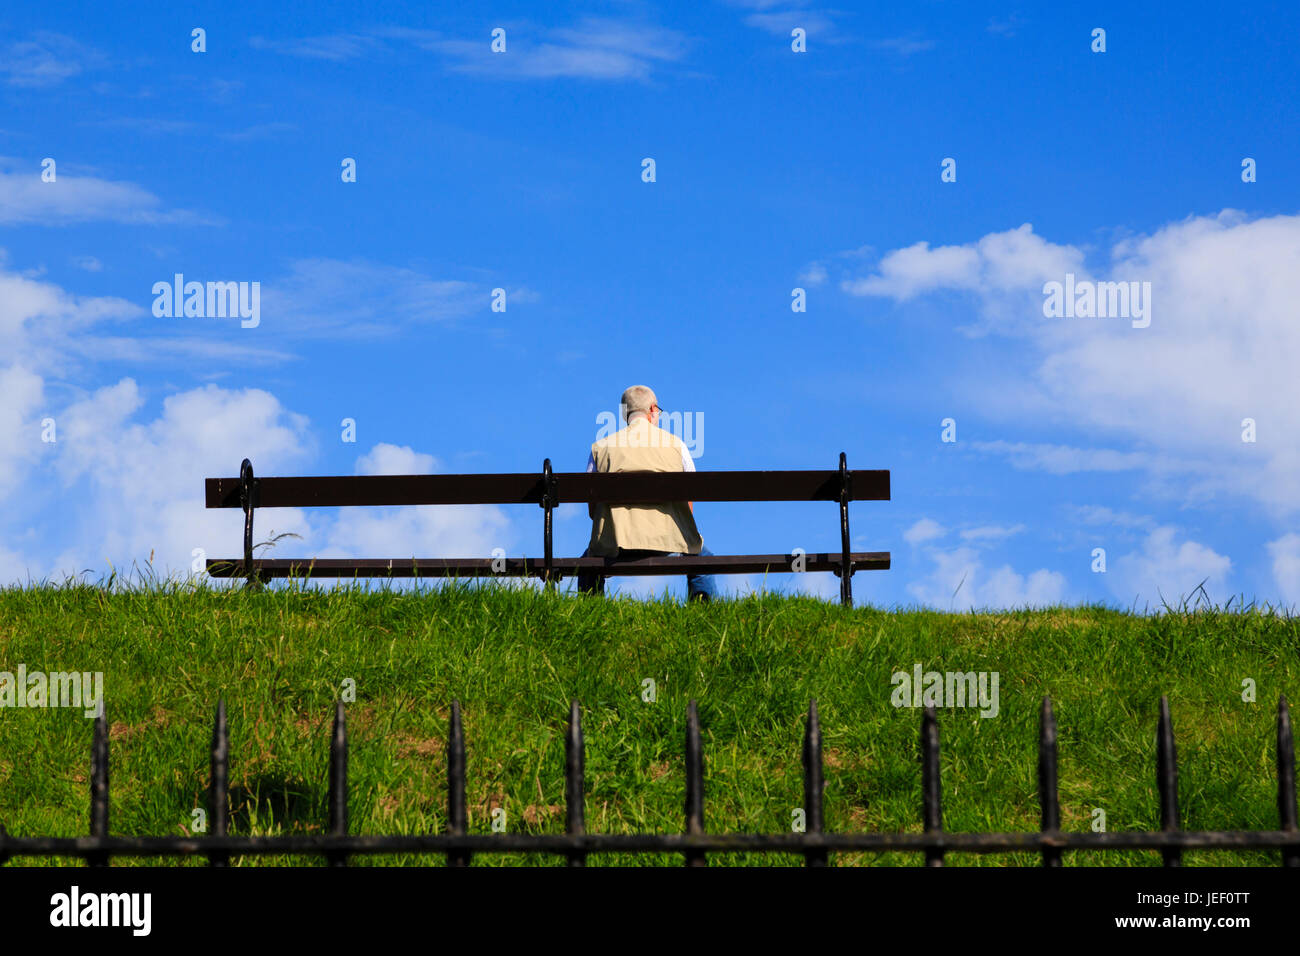 Senior citizen man sitting alone on a bench on a grass bank against a blue sky. On the walls of Berwick upon Tweed. Englands most northerly town. Stock Photo